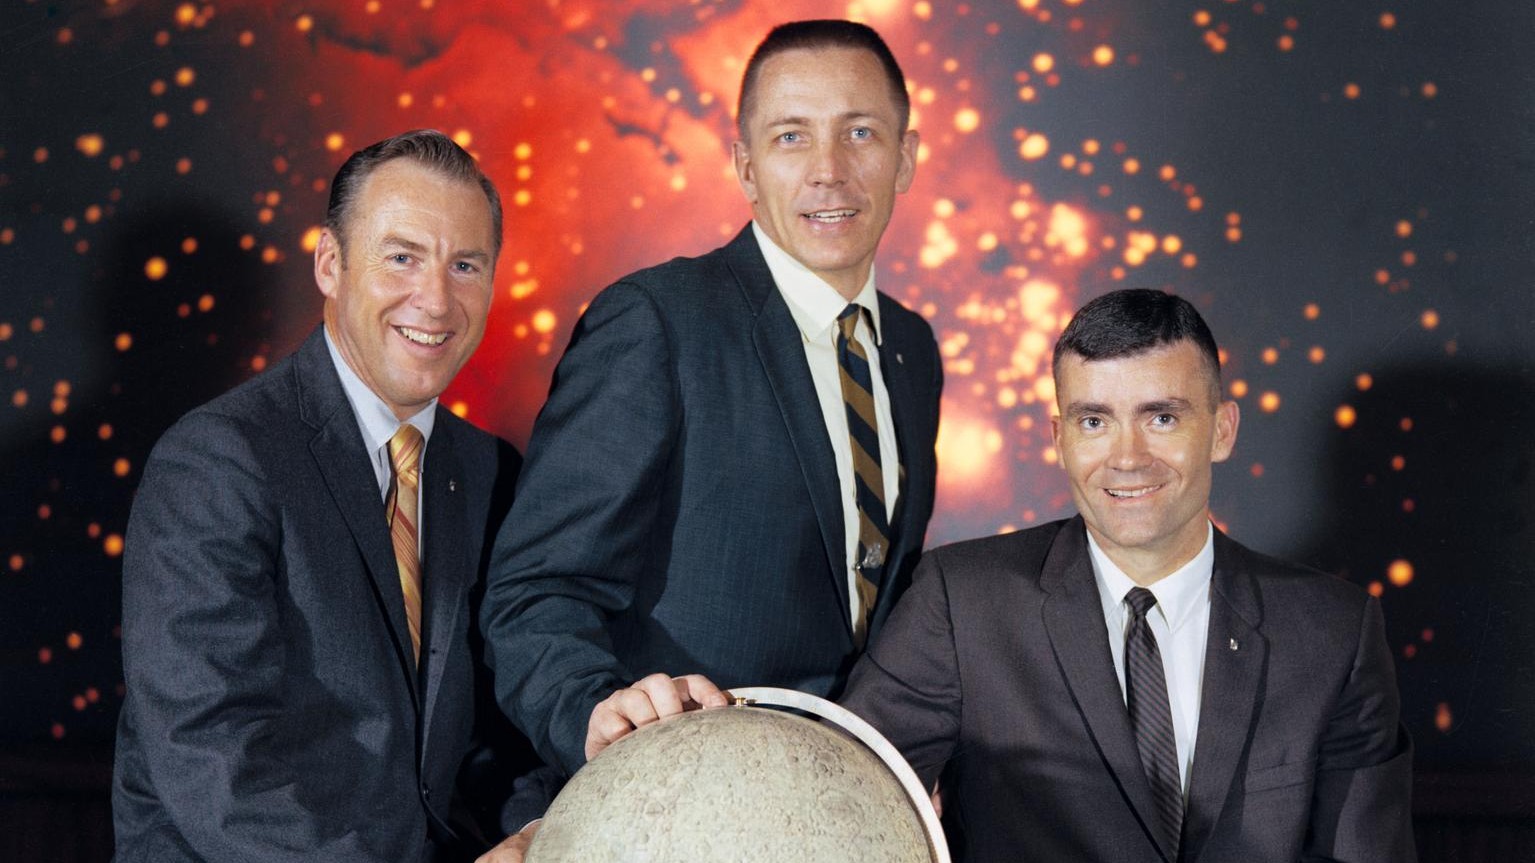 three astronauts in suits stand in a row. the middle one, jack swigert, has his hand on a globe showing the moon. behind them is a picture of a nebula